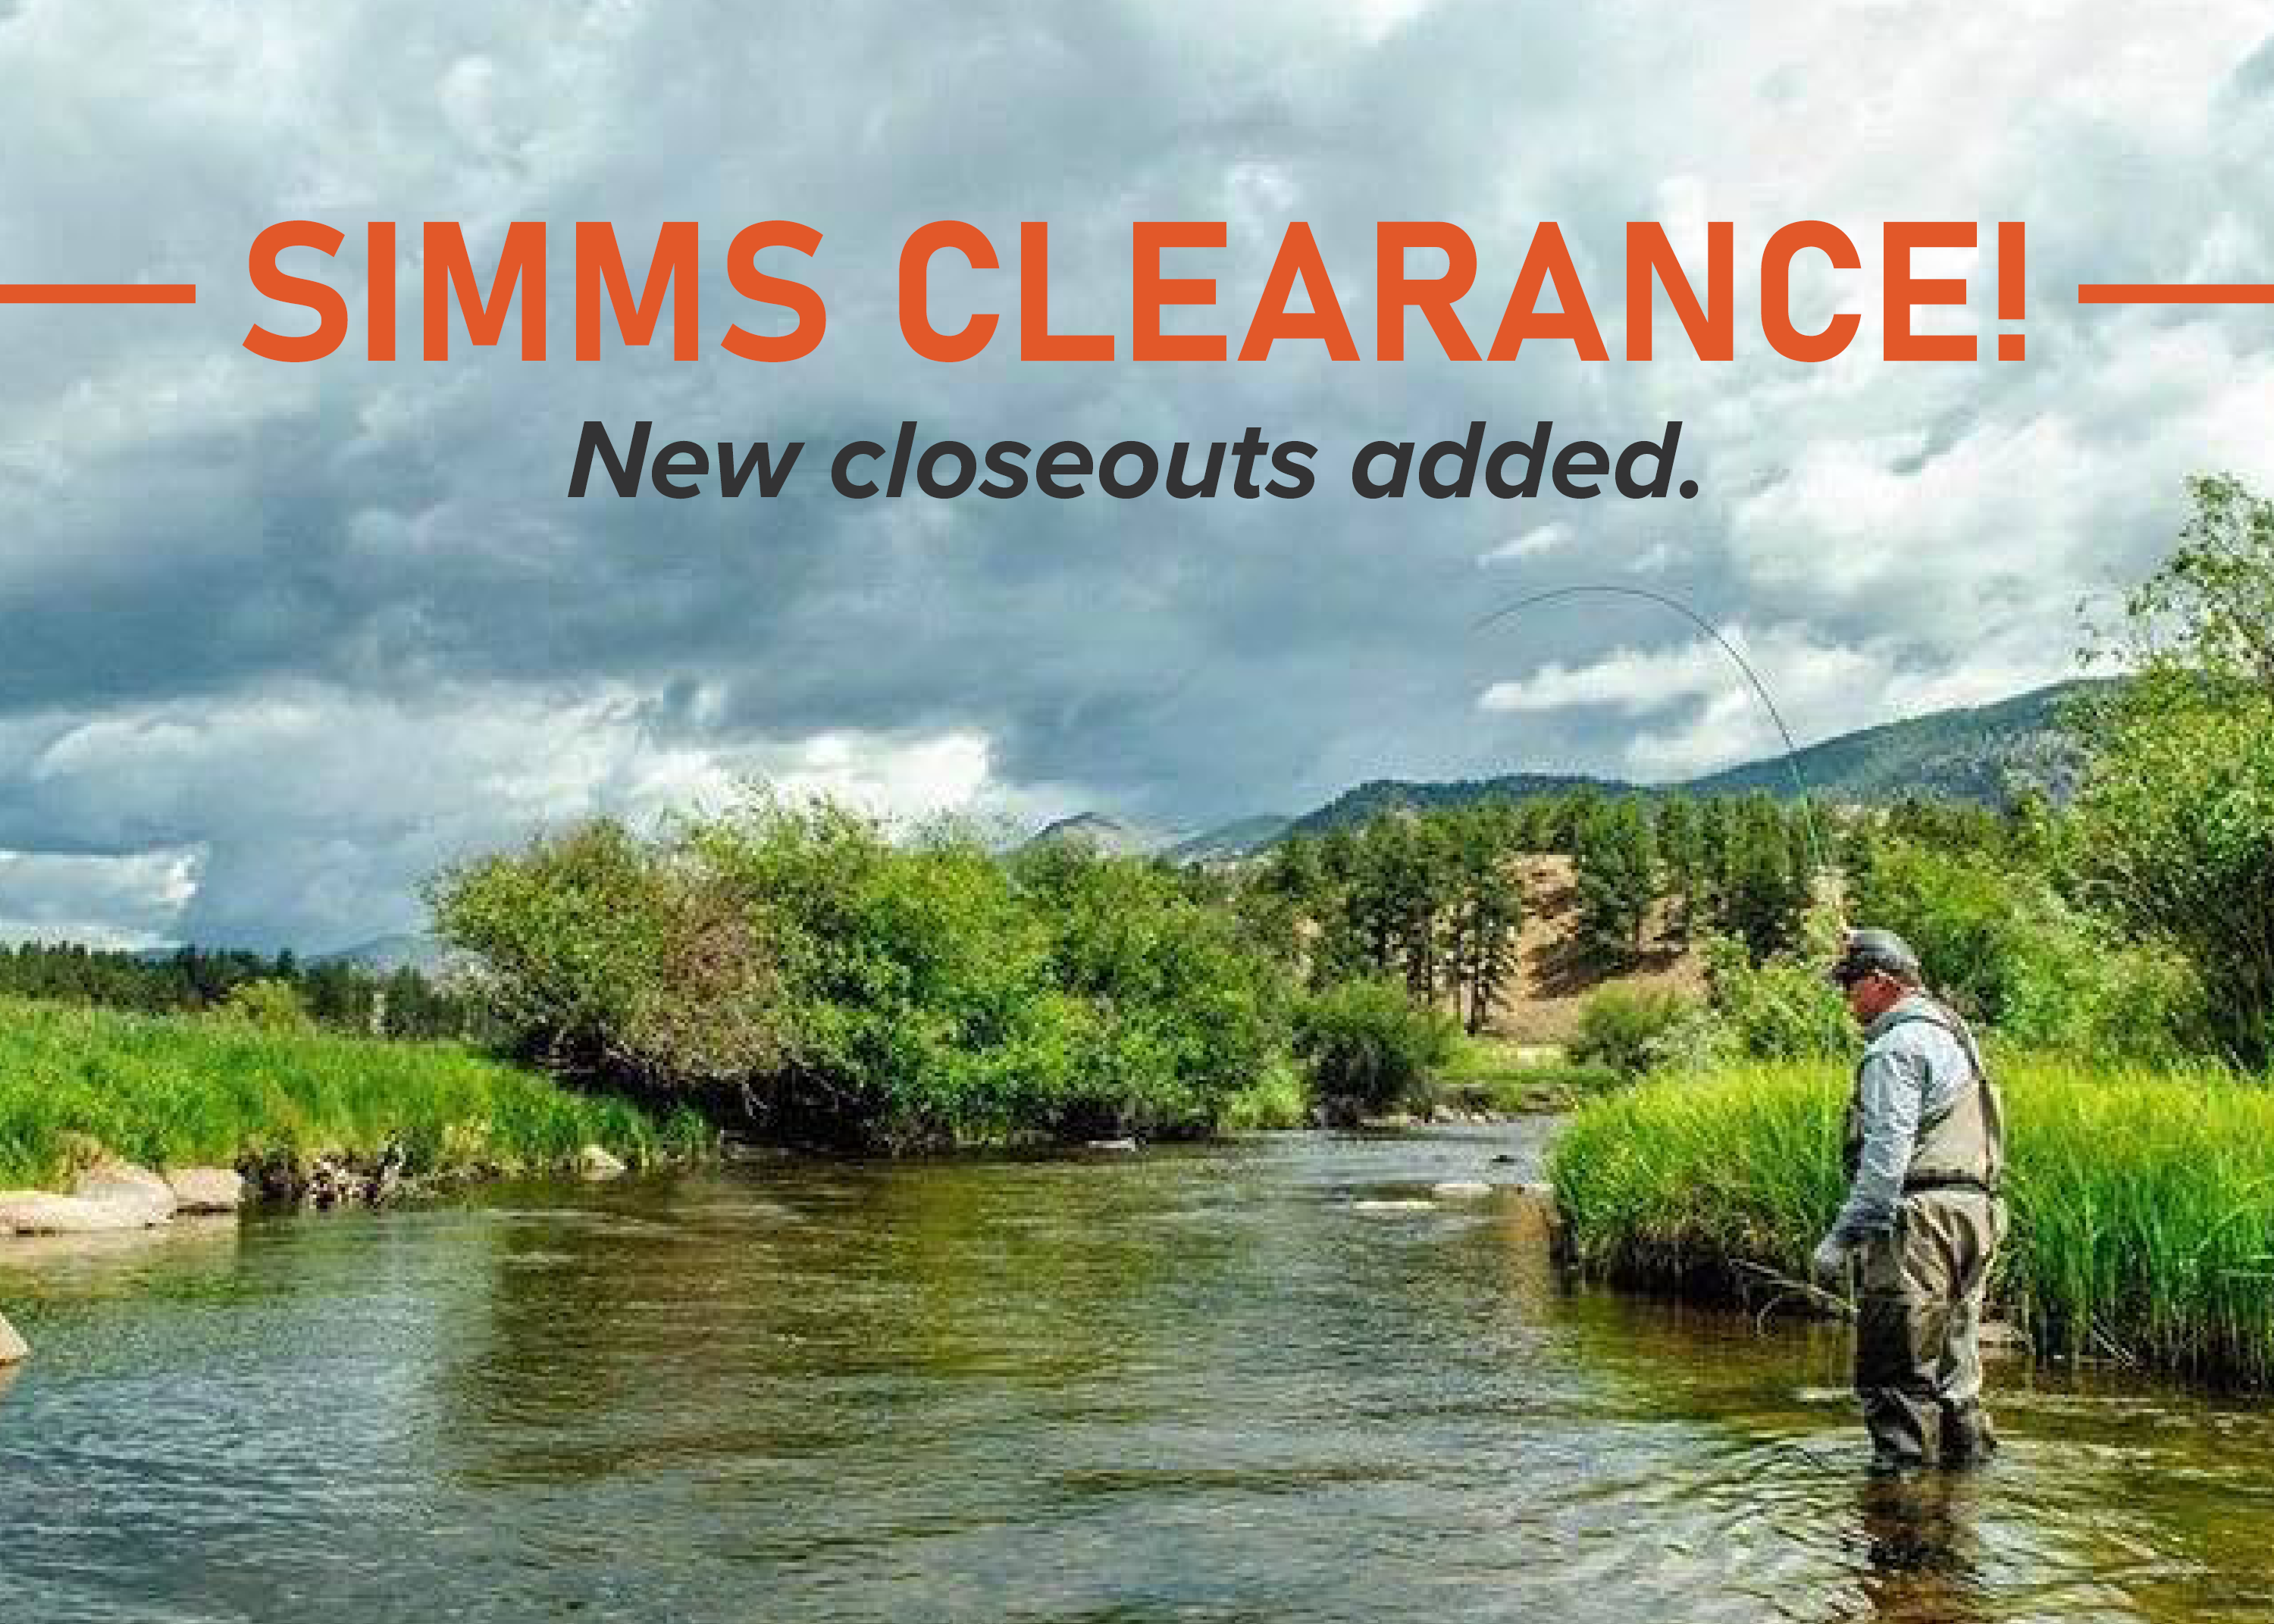 Simms Clearance